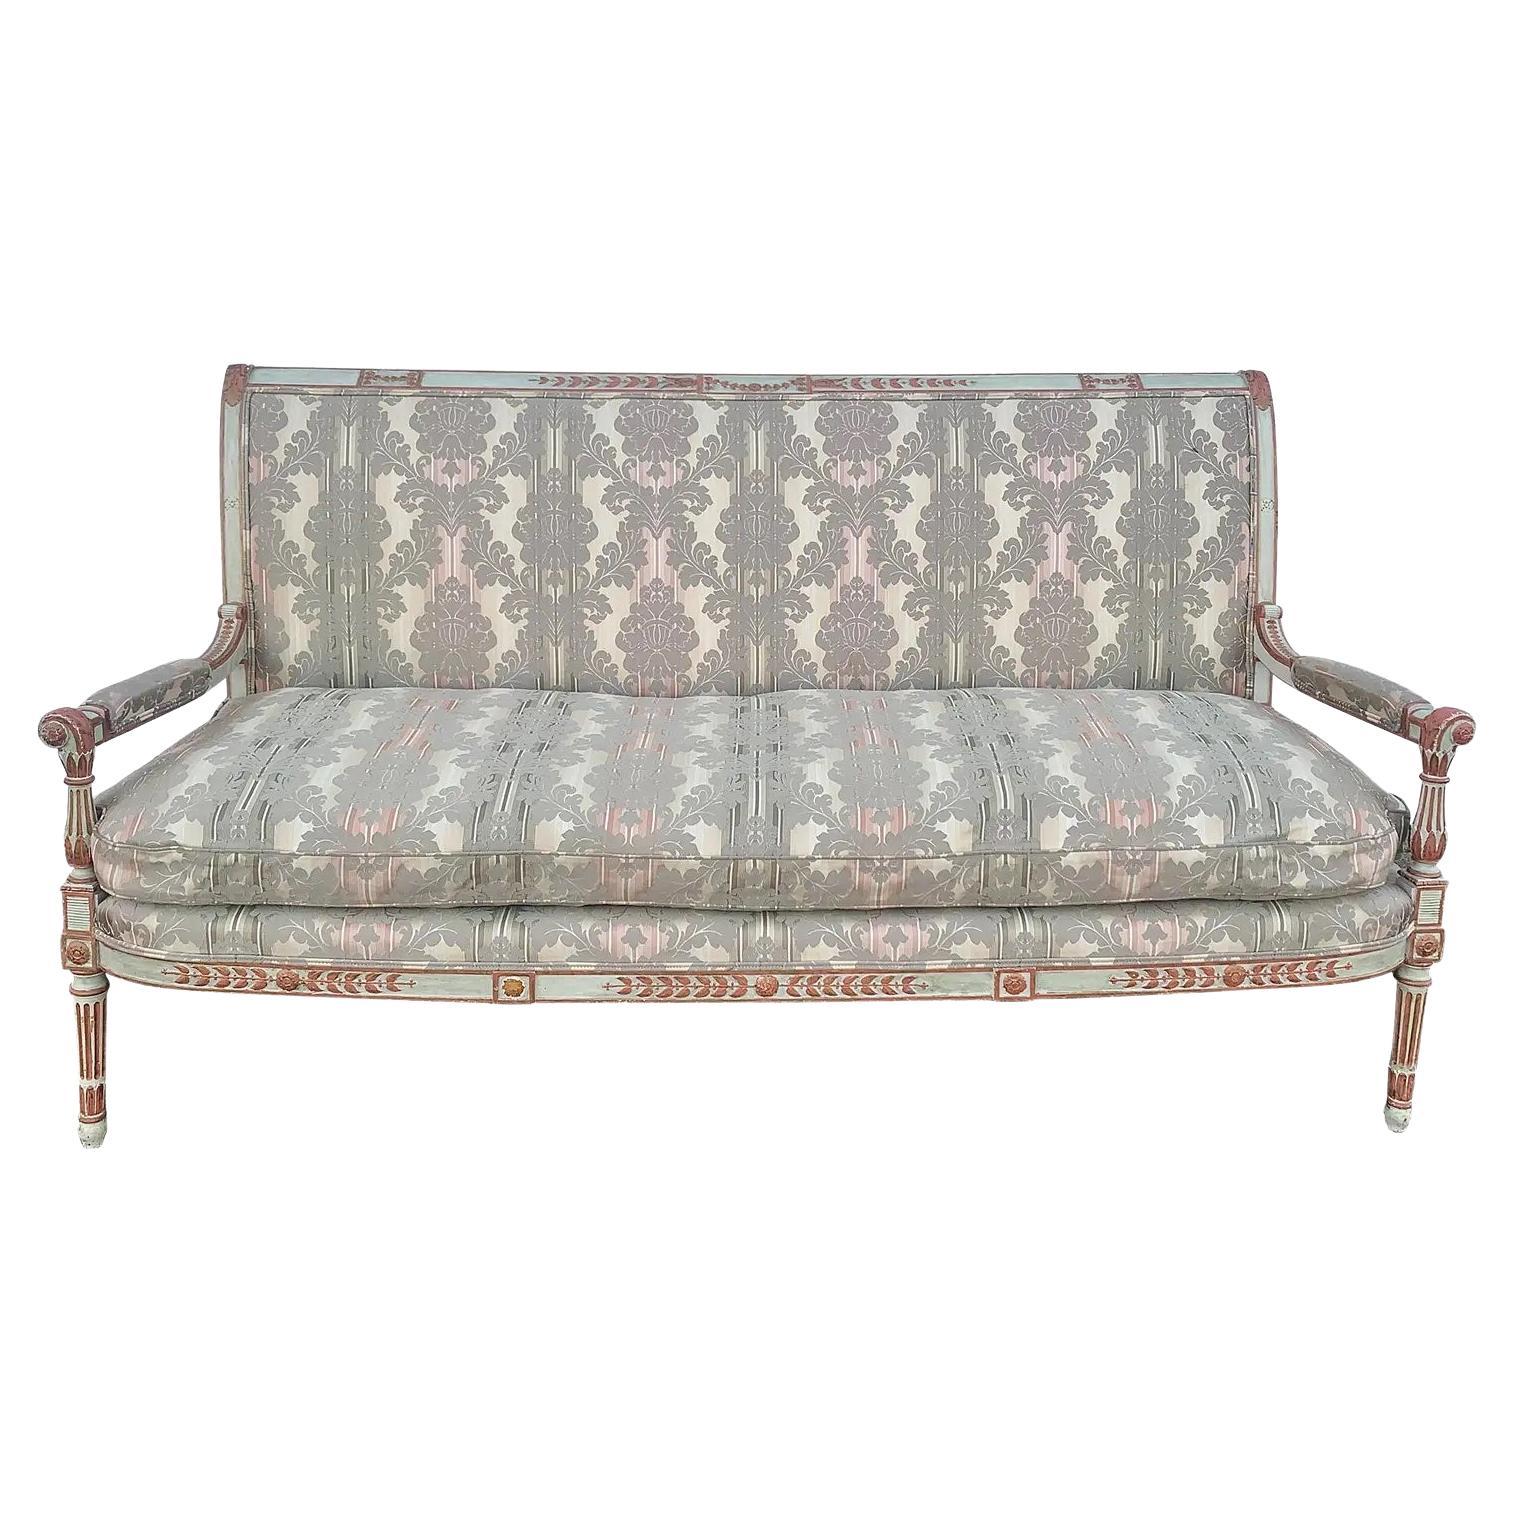 Early 20th Century French Provincial Sofa For Sale